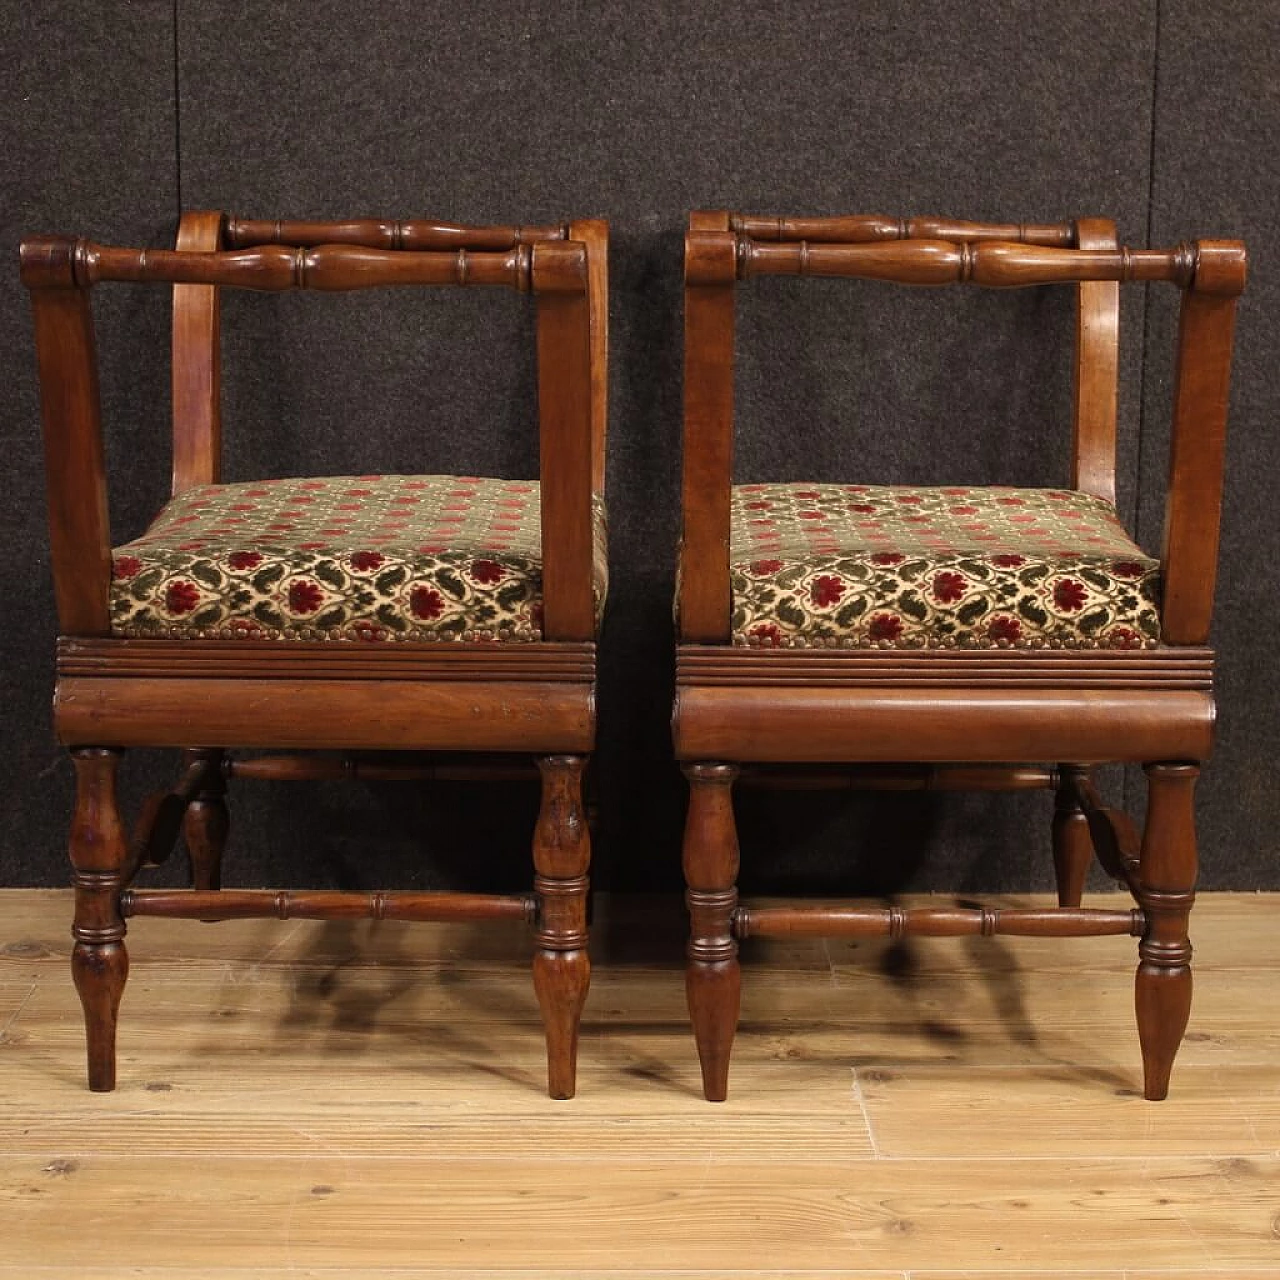 Pair of Charles X benches in carved walnut and floral fabric, 19th century 1116100